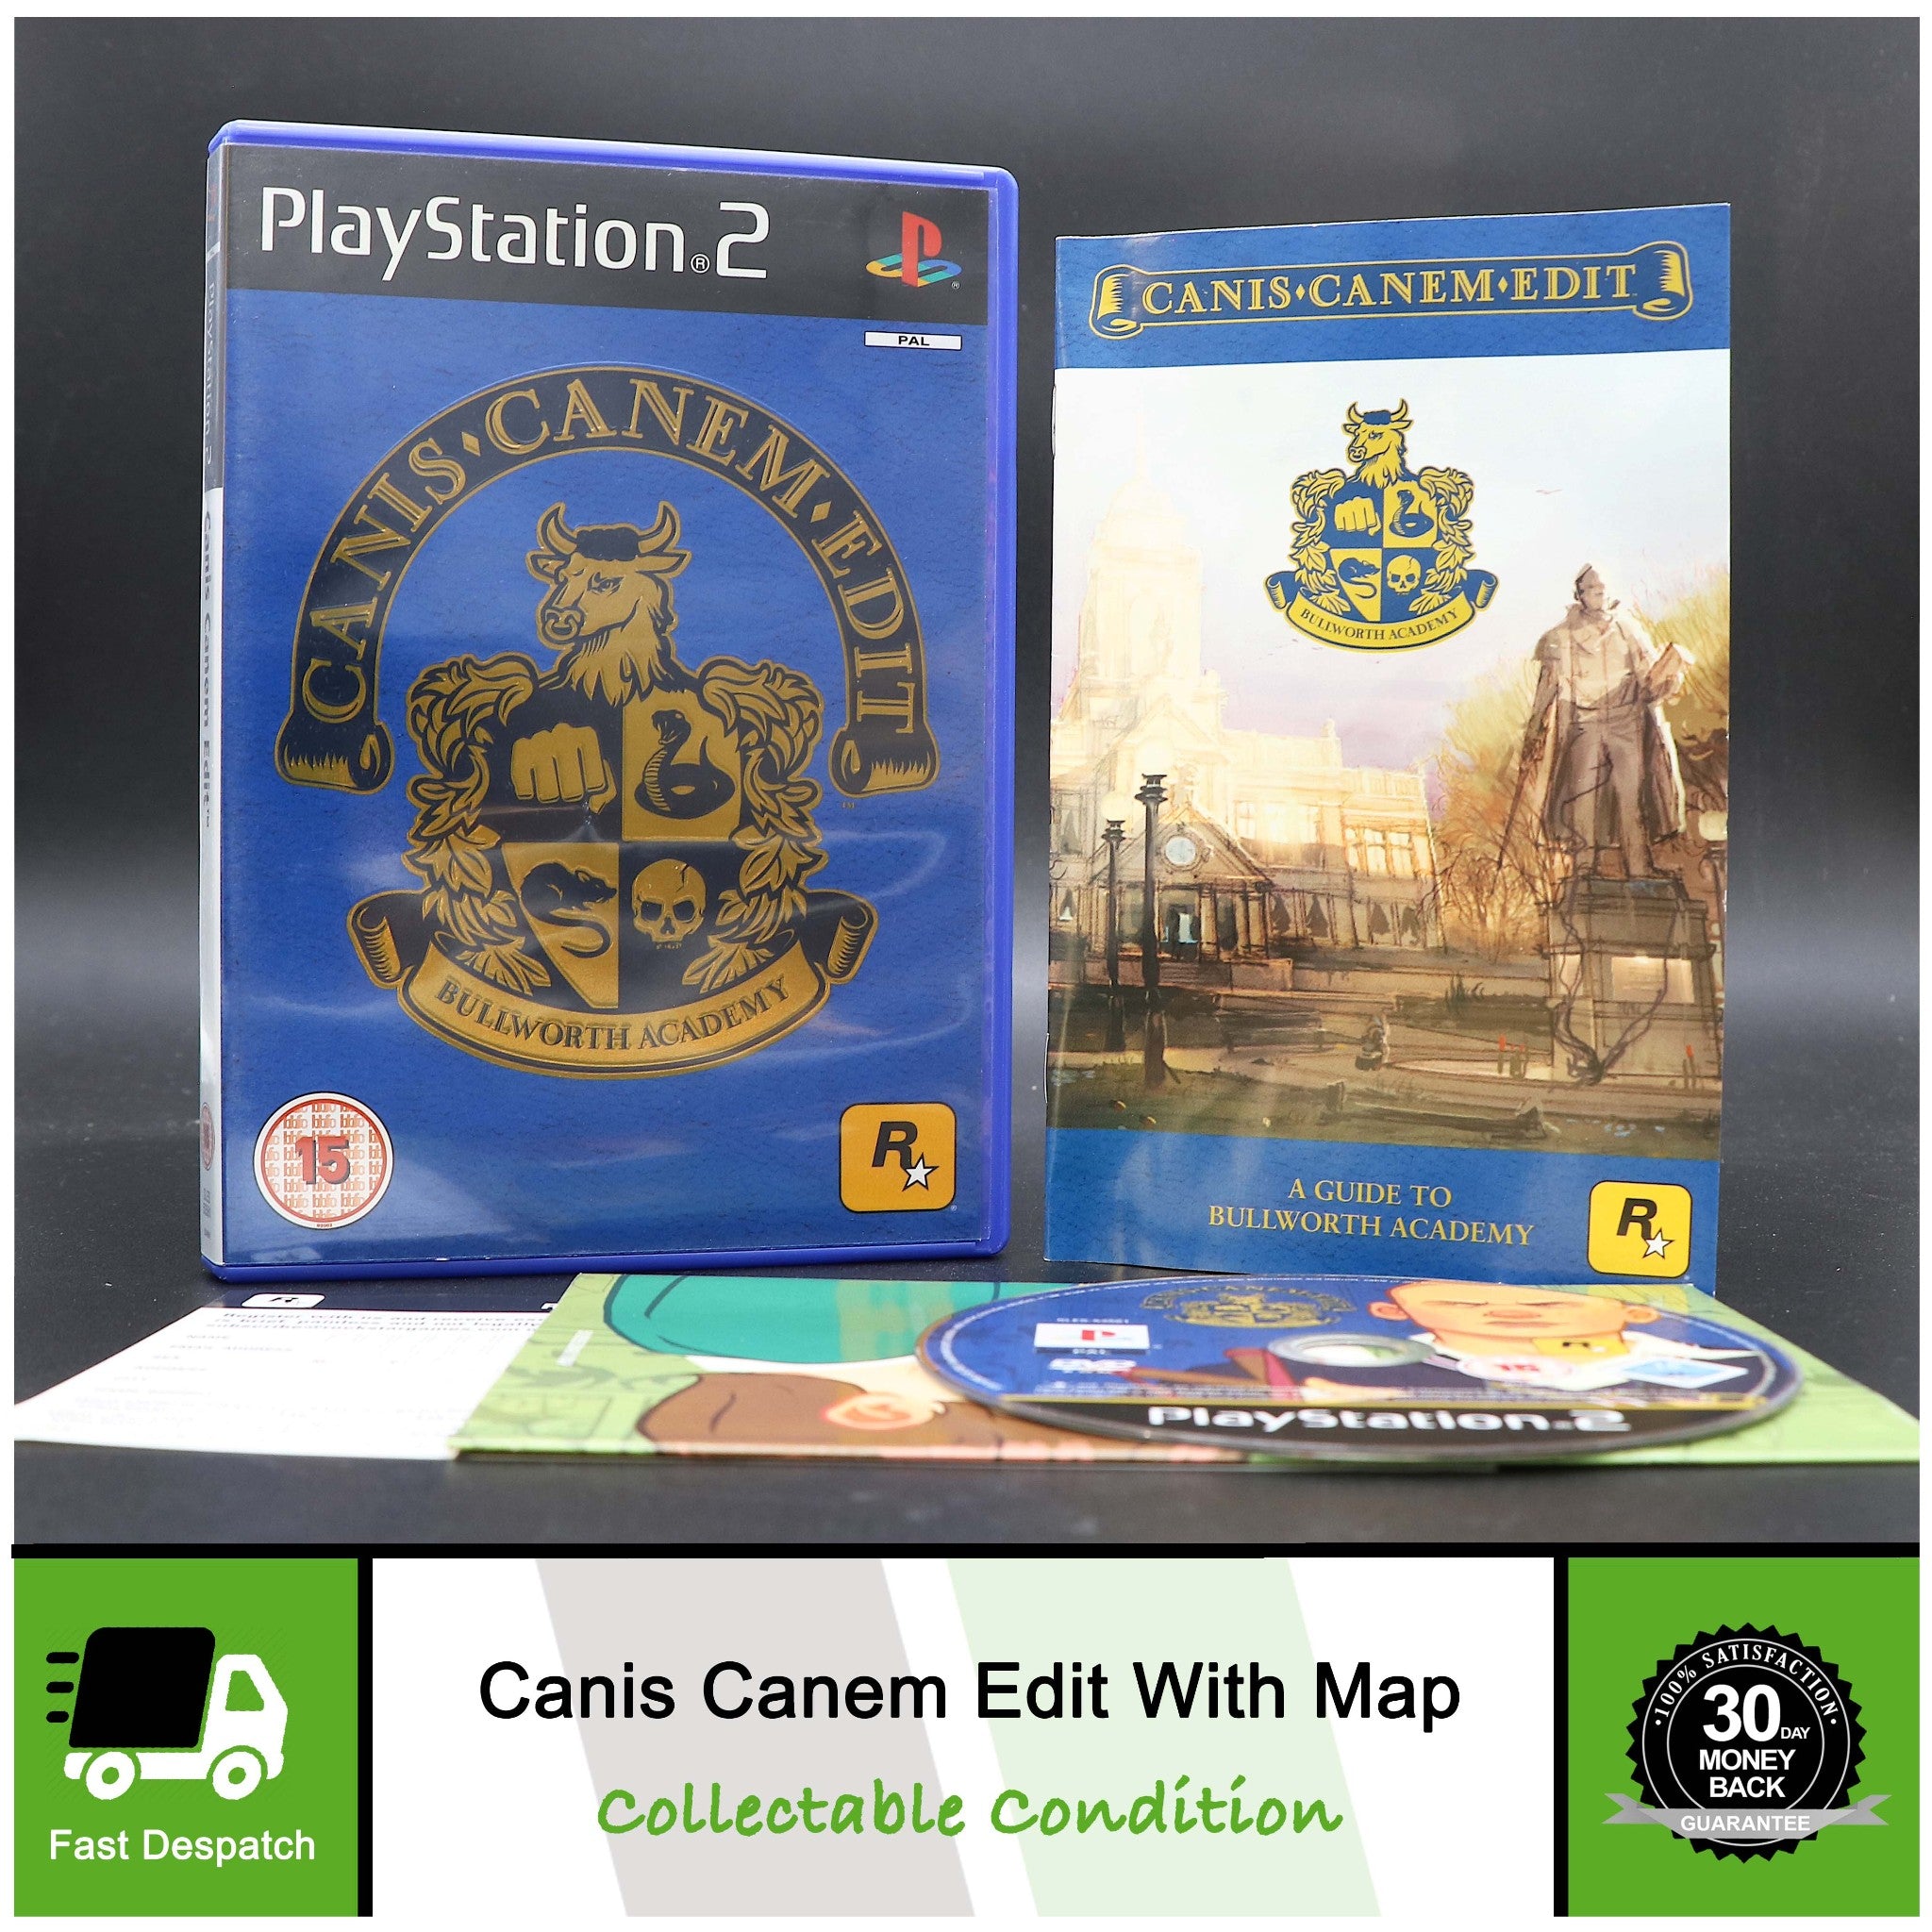 Canis Canem Edit Bullworth Academy Bully | PS2 Game Map | Collectable Condition